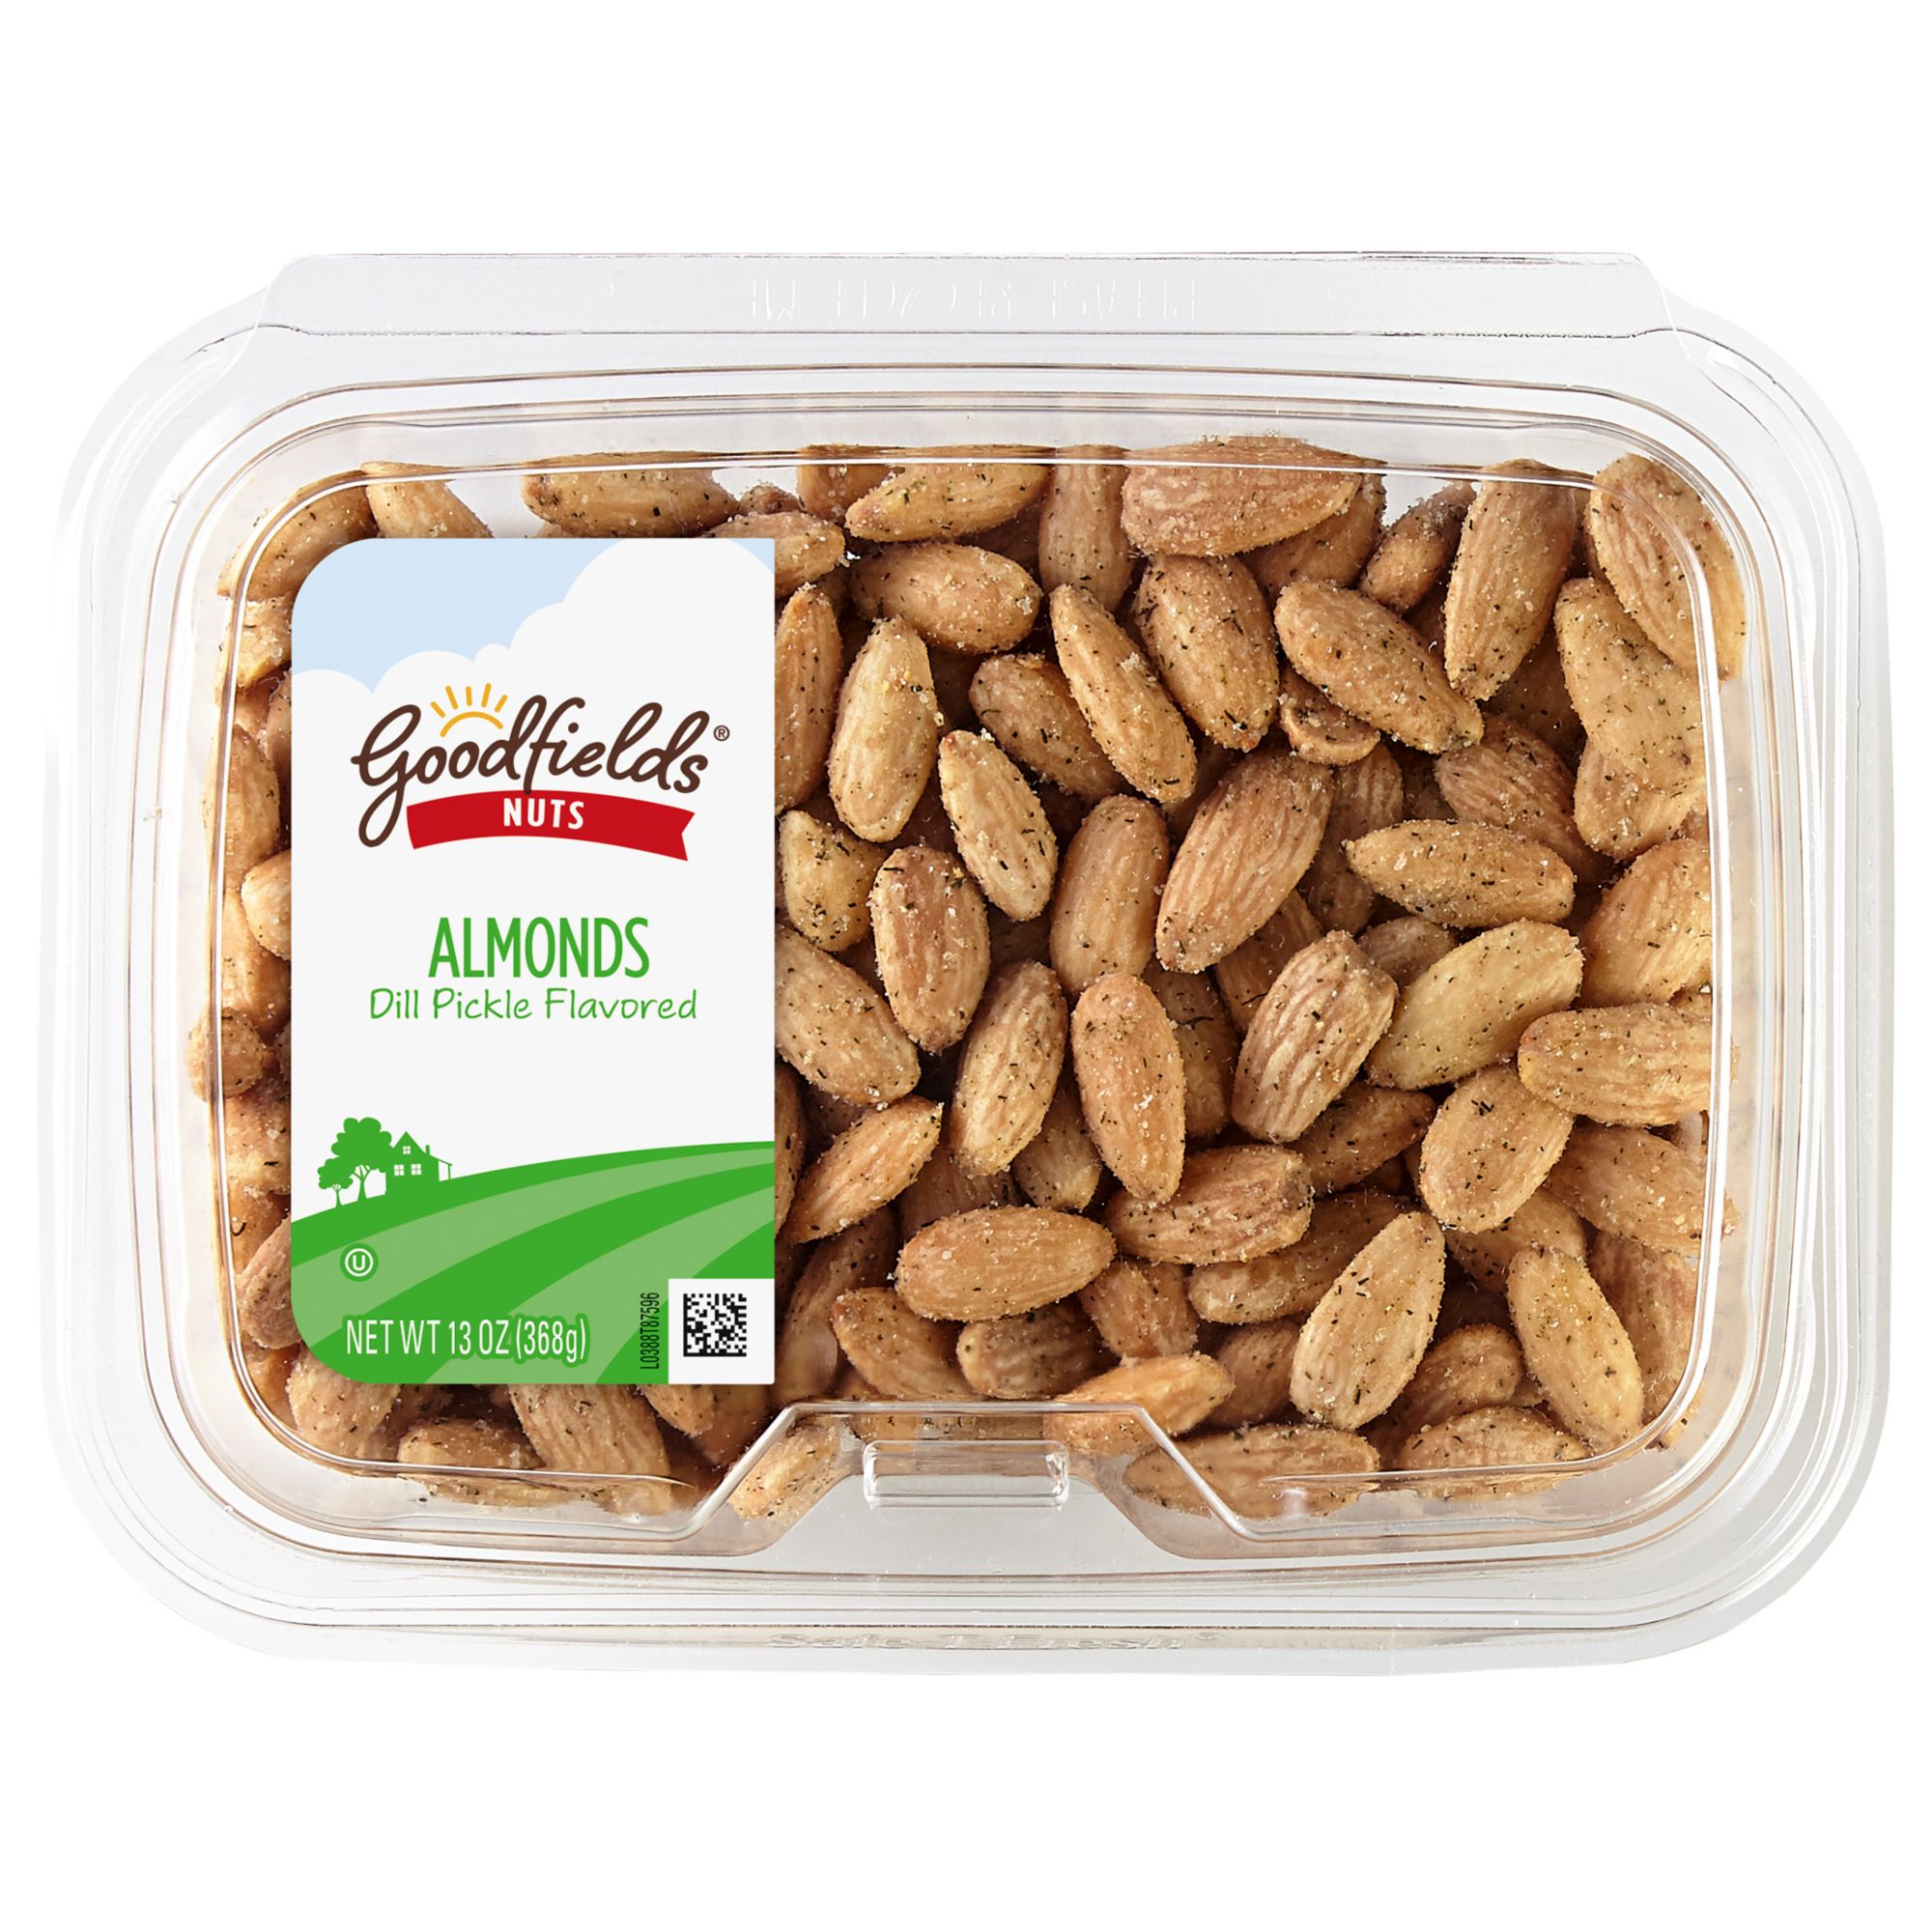 Goodfield's Dill Pickle Flavored Almonds, 13 oz.